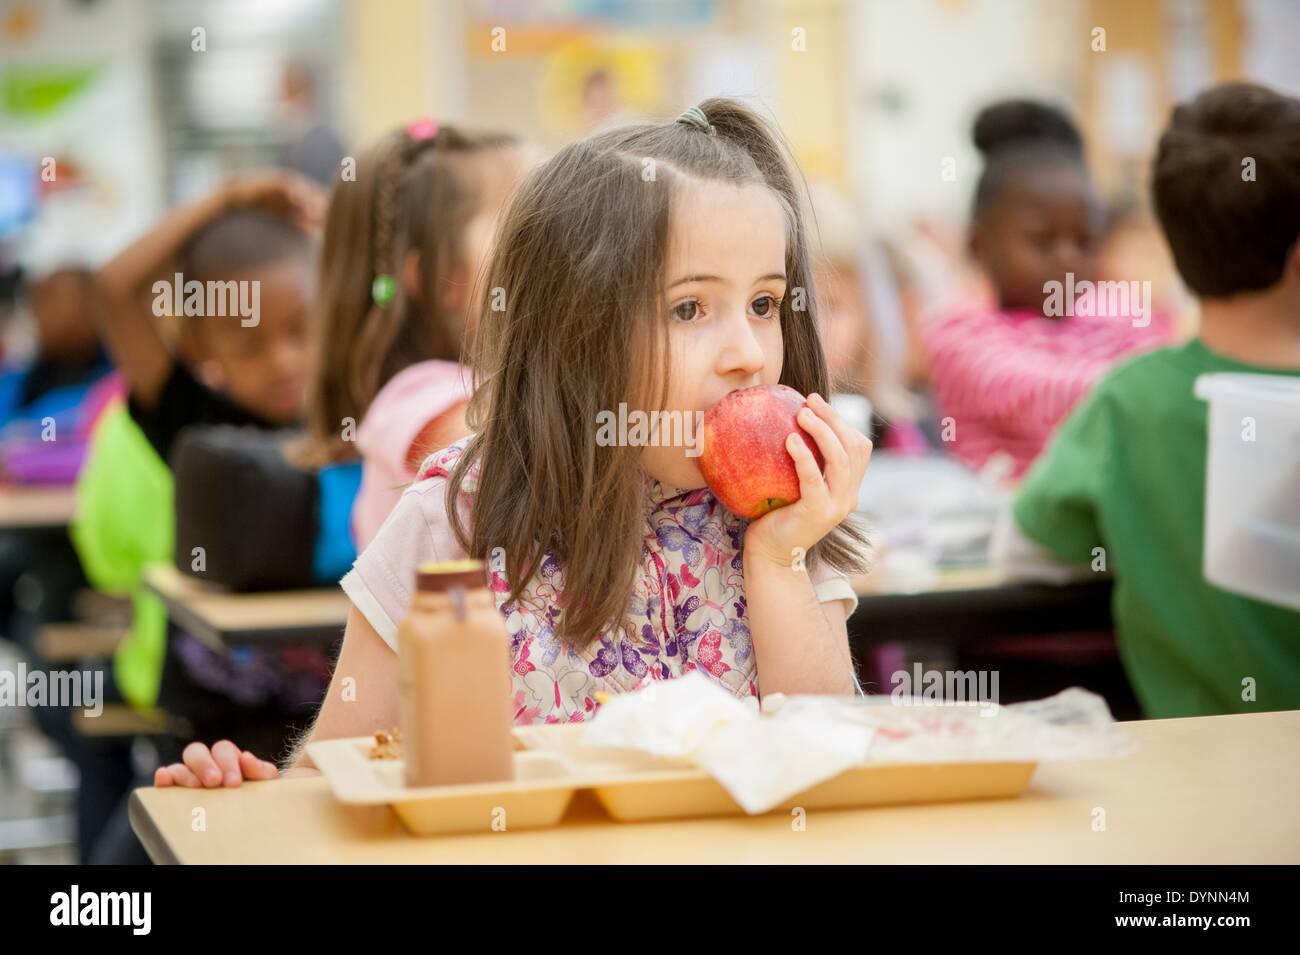 Girl biting into apple in school cafeteria Hagerstown, Maryland Stock Photo